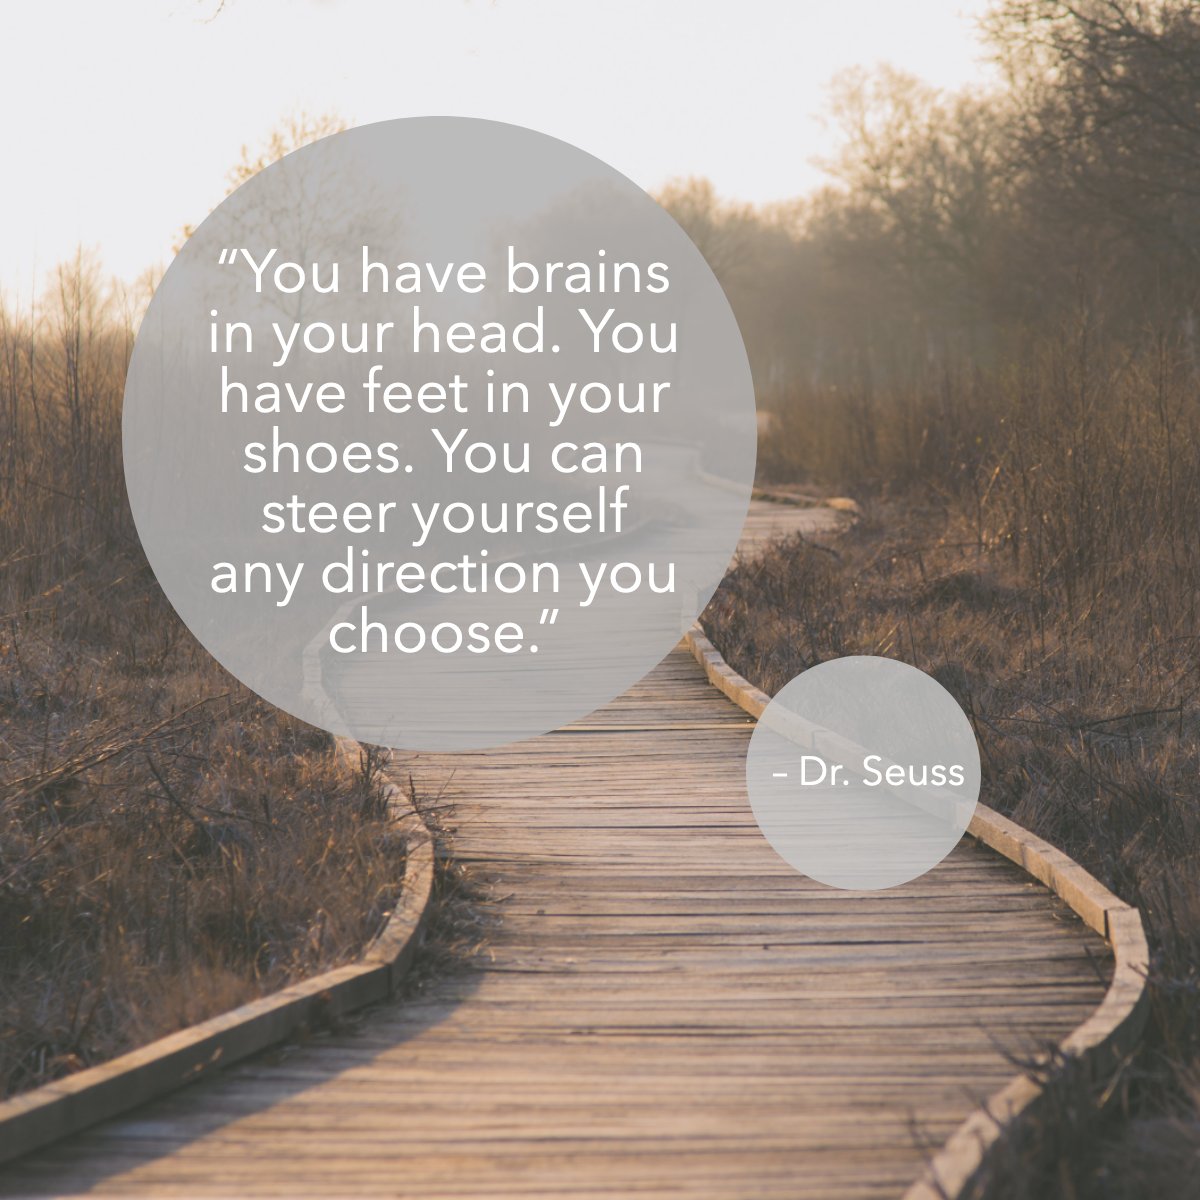 '...You can steer yourself in any direction you choose.'
—Dr. Seuss

#Drseuss #Path #Inspirational #Inspiring #Quote
#Walkaway